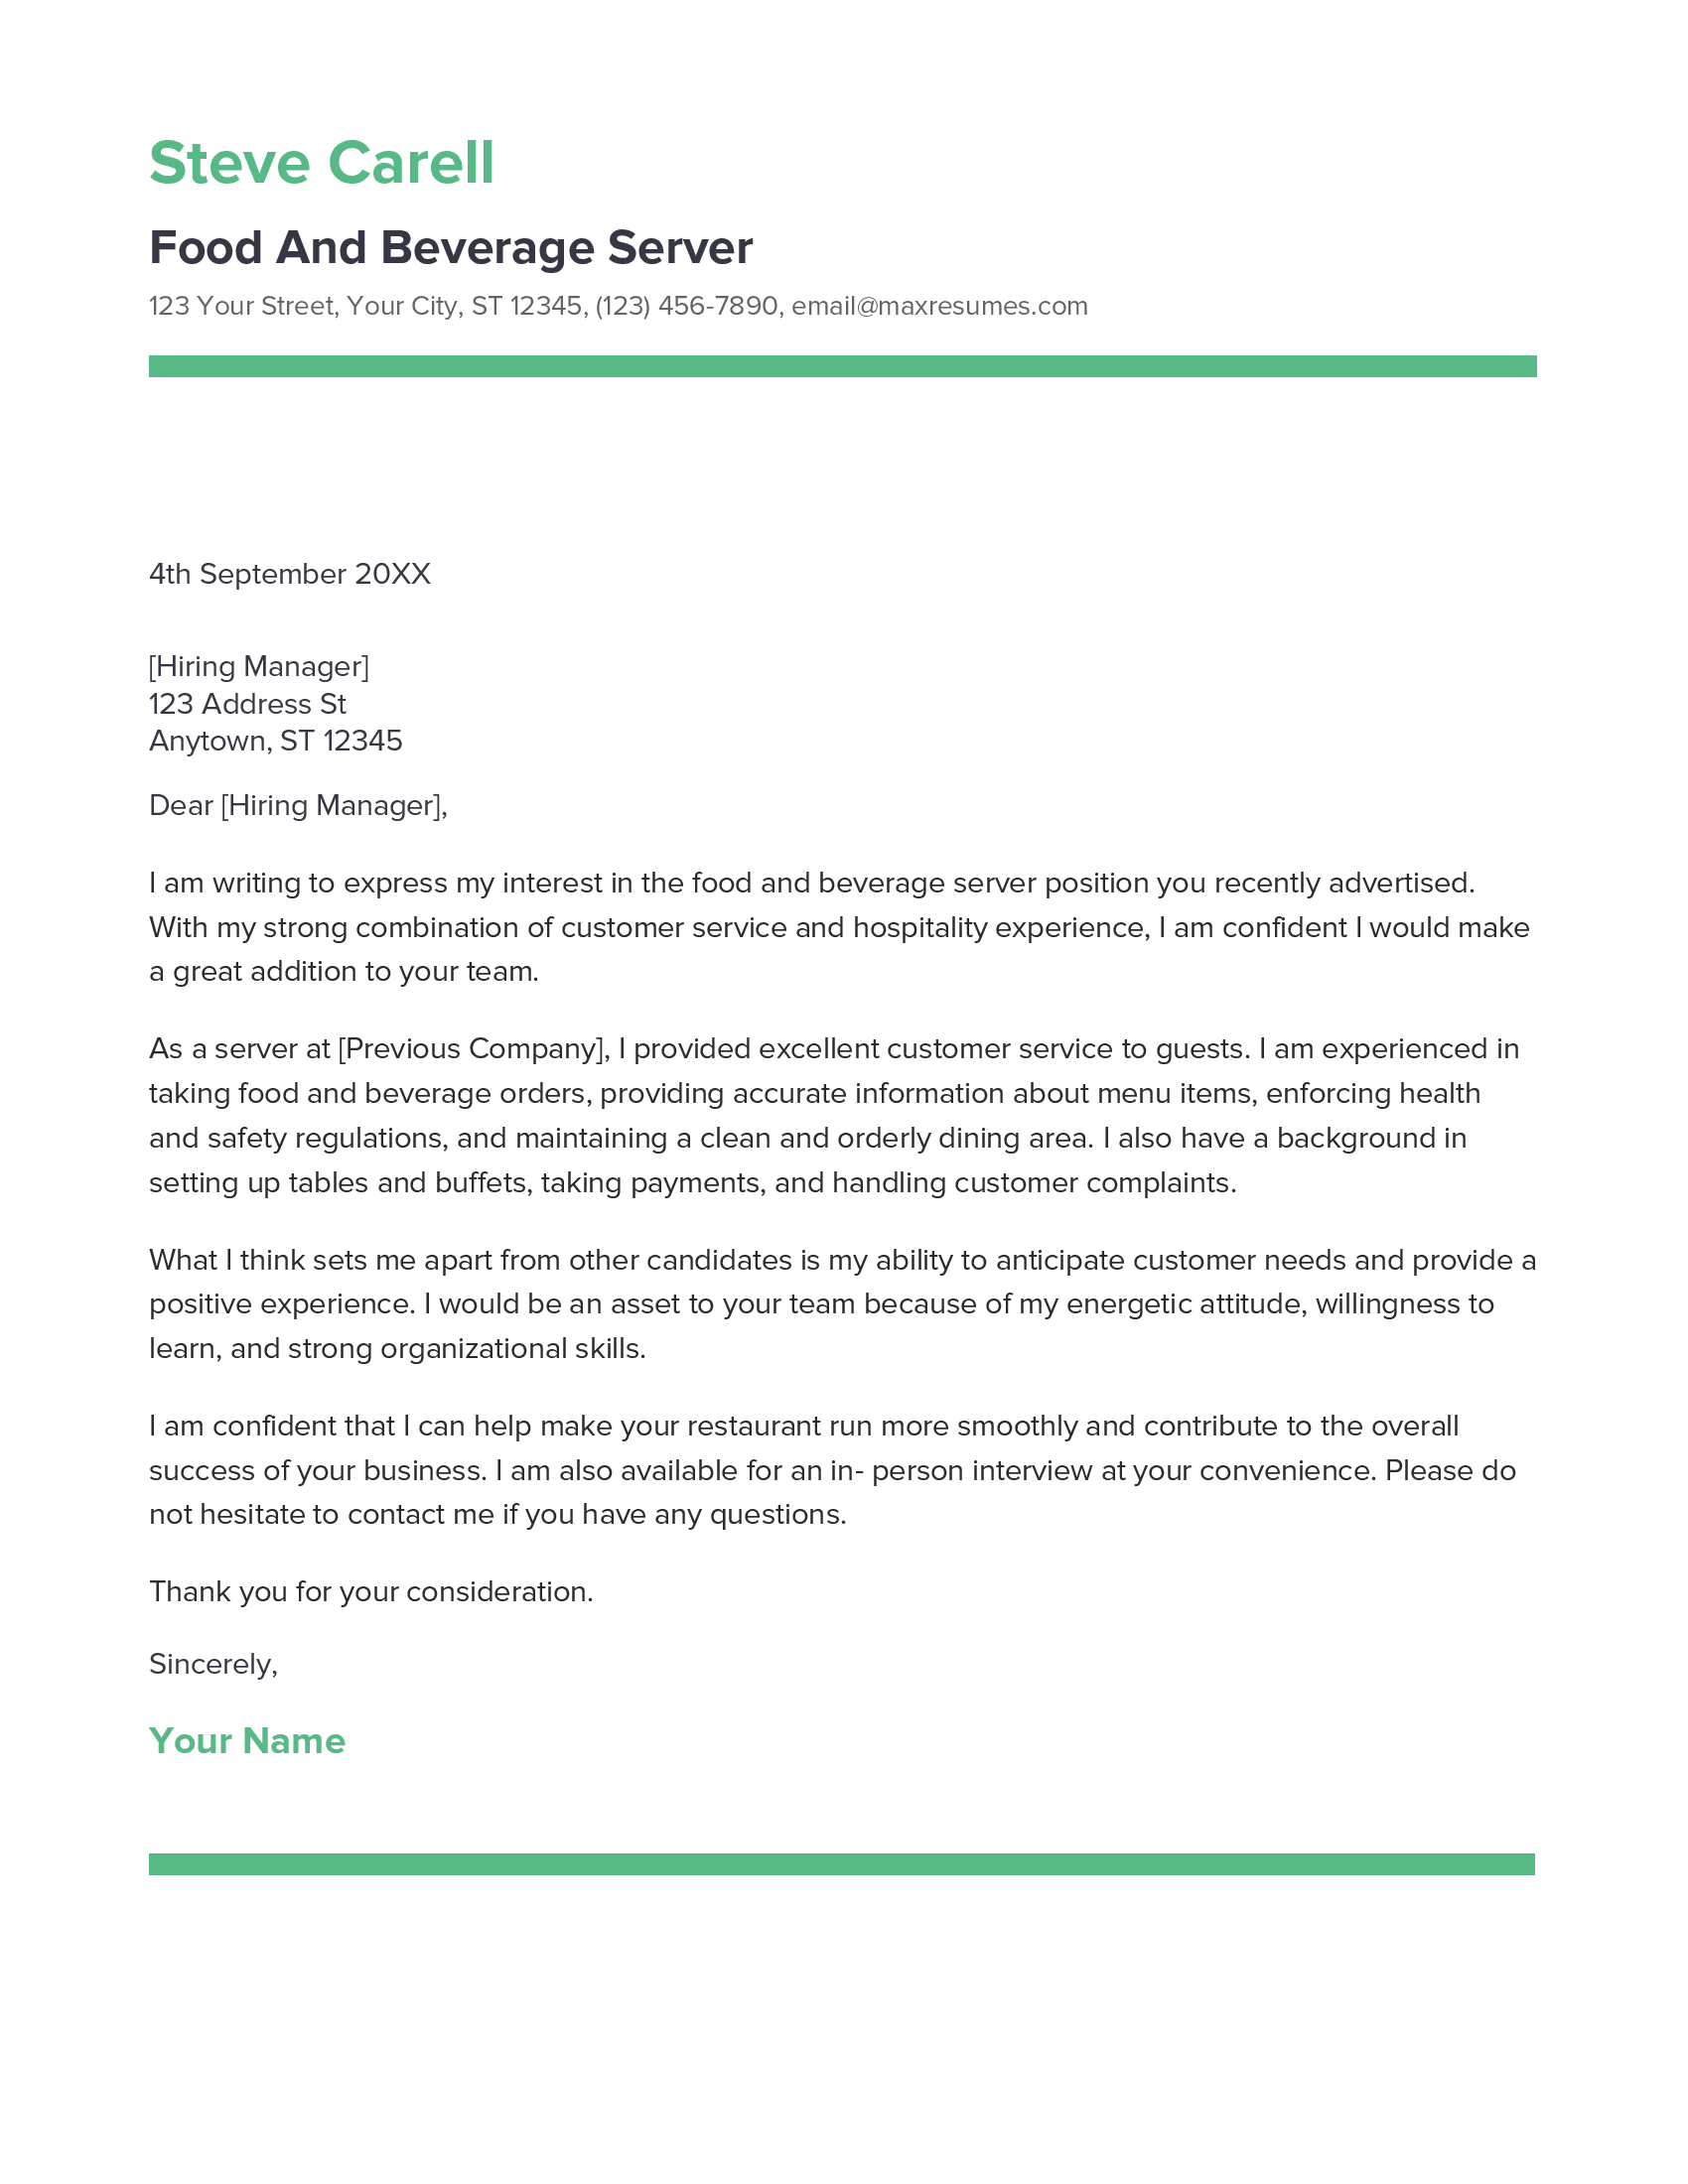 Food And Beverage Server Cover Letter Example